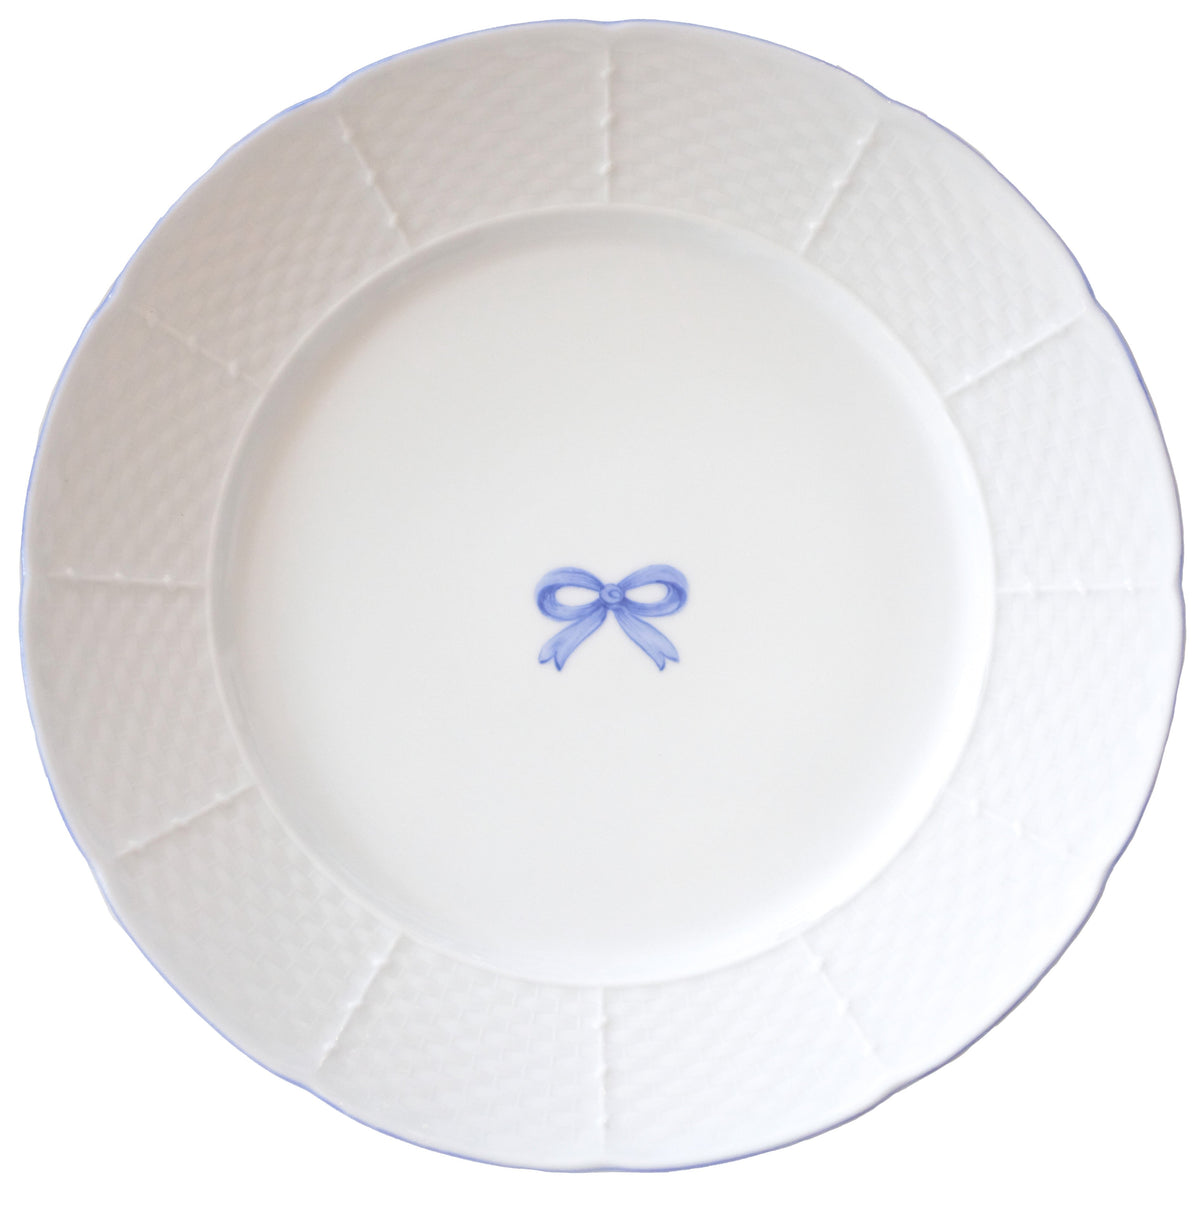 Basket Weave Dinner Plate in Bow